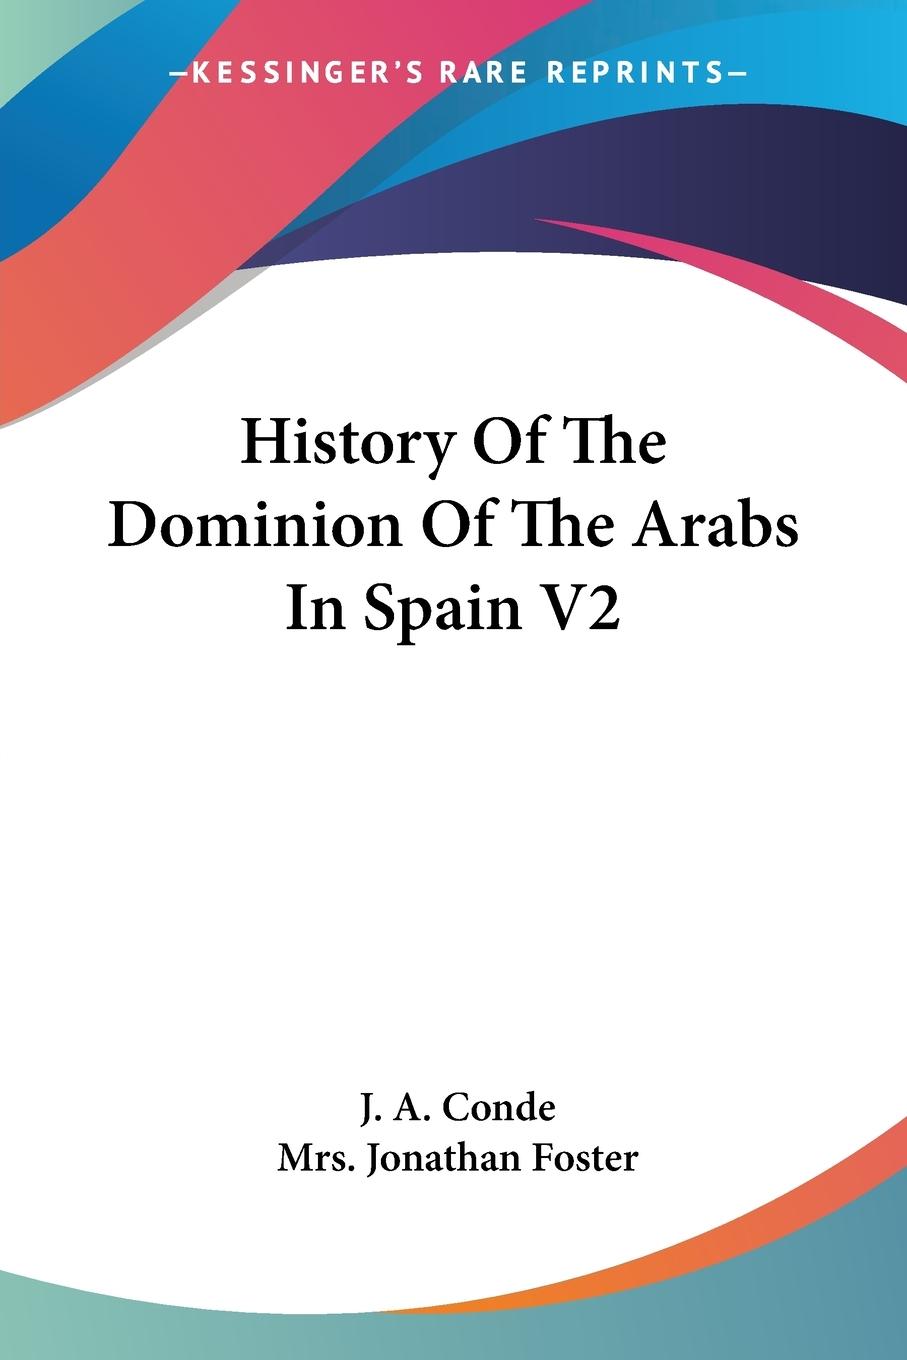 History Of The Dominion Of The Arabs In Spain V2 - Conde, J. A.